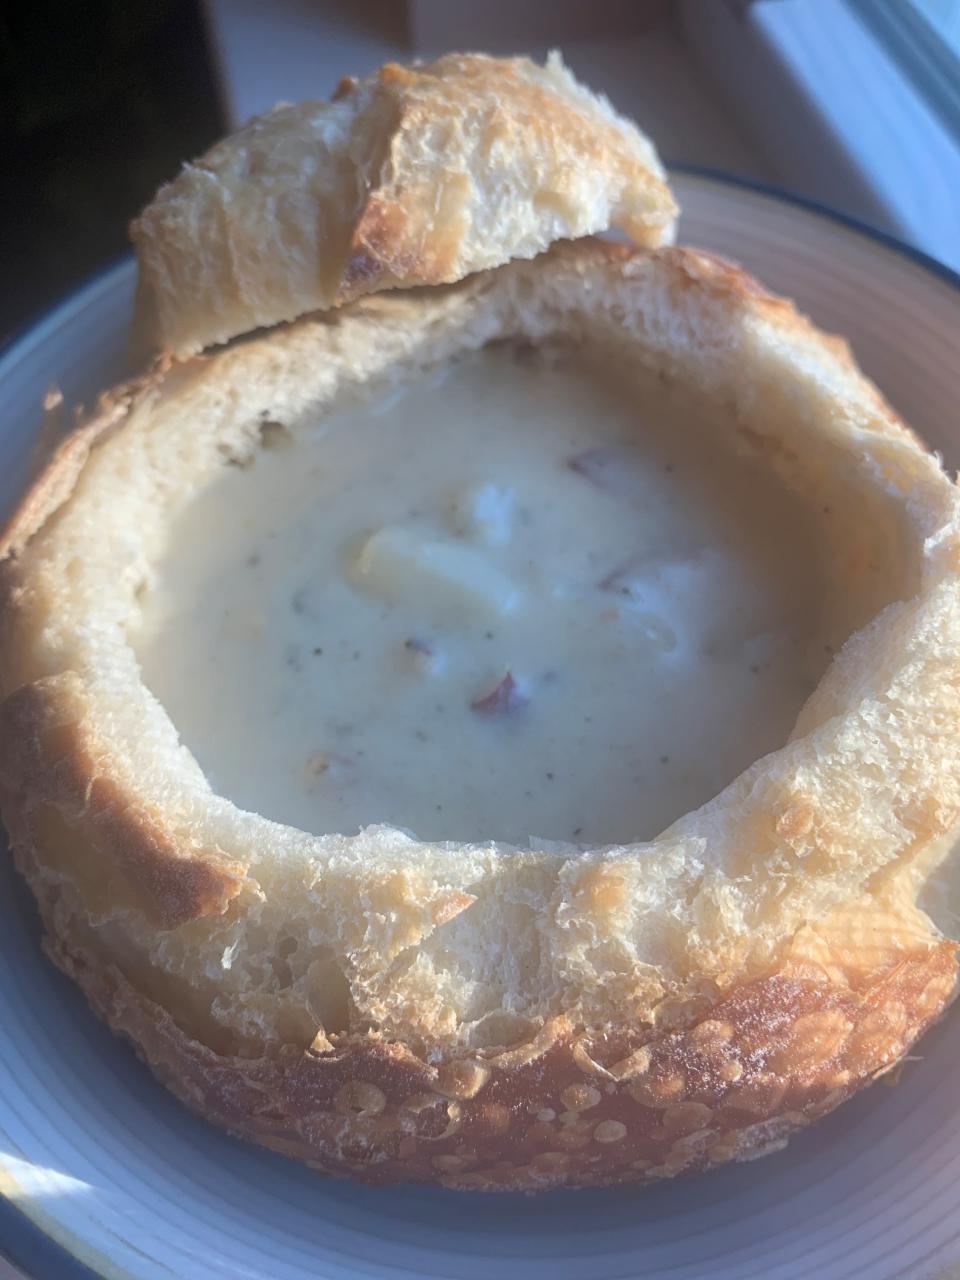 New England clam chowder from Country Kettle Chowda in Beach Haven. Definitely get the bread bowl.